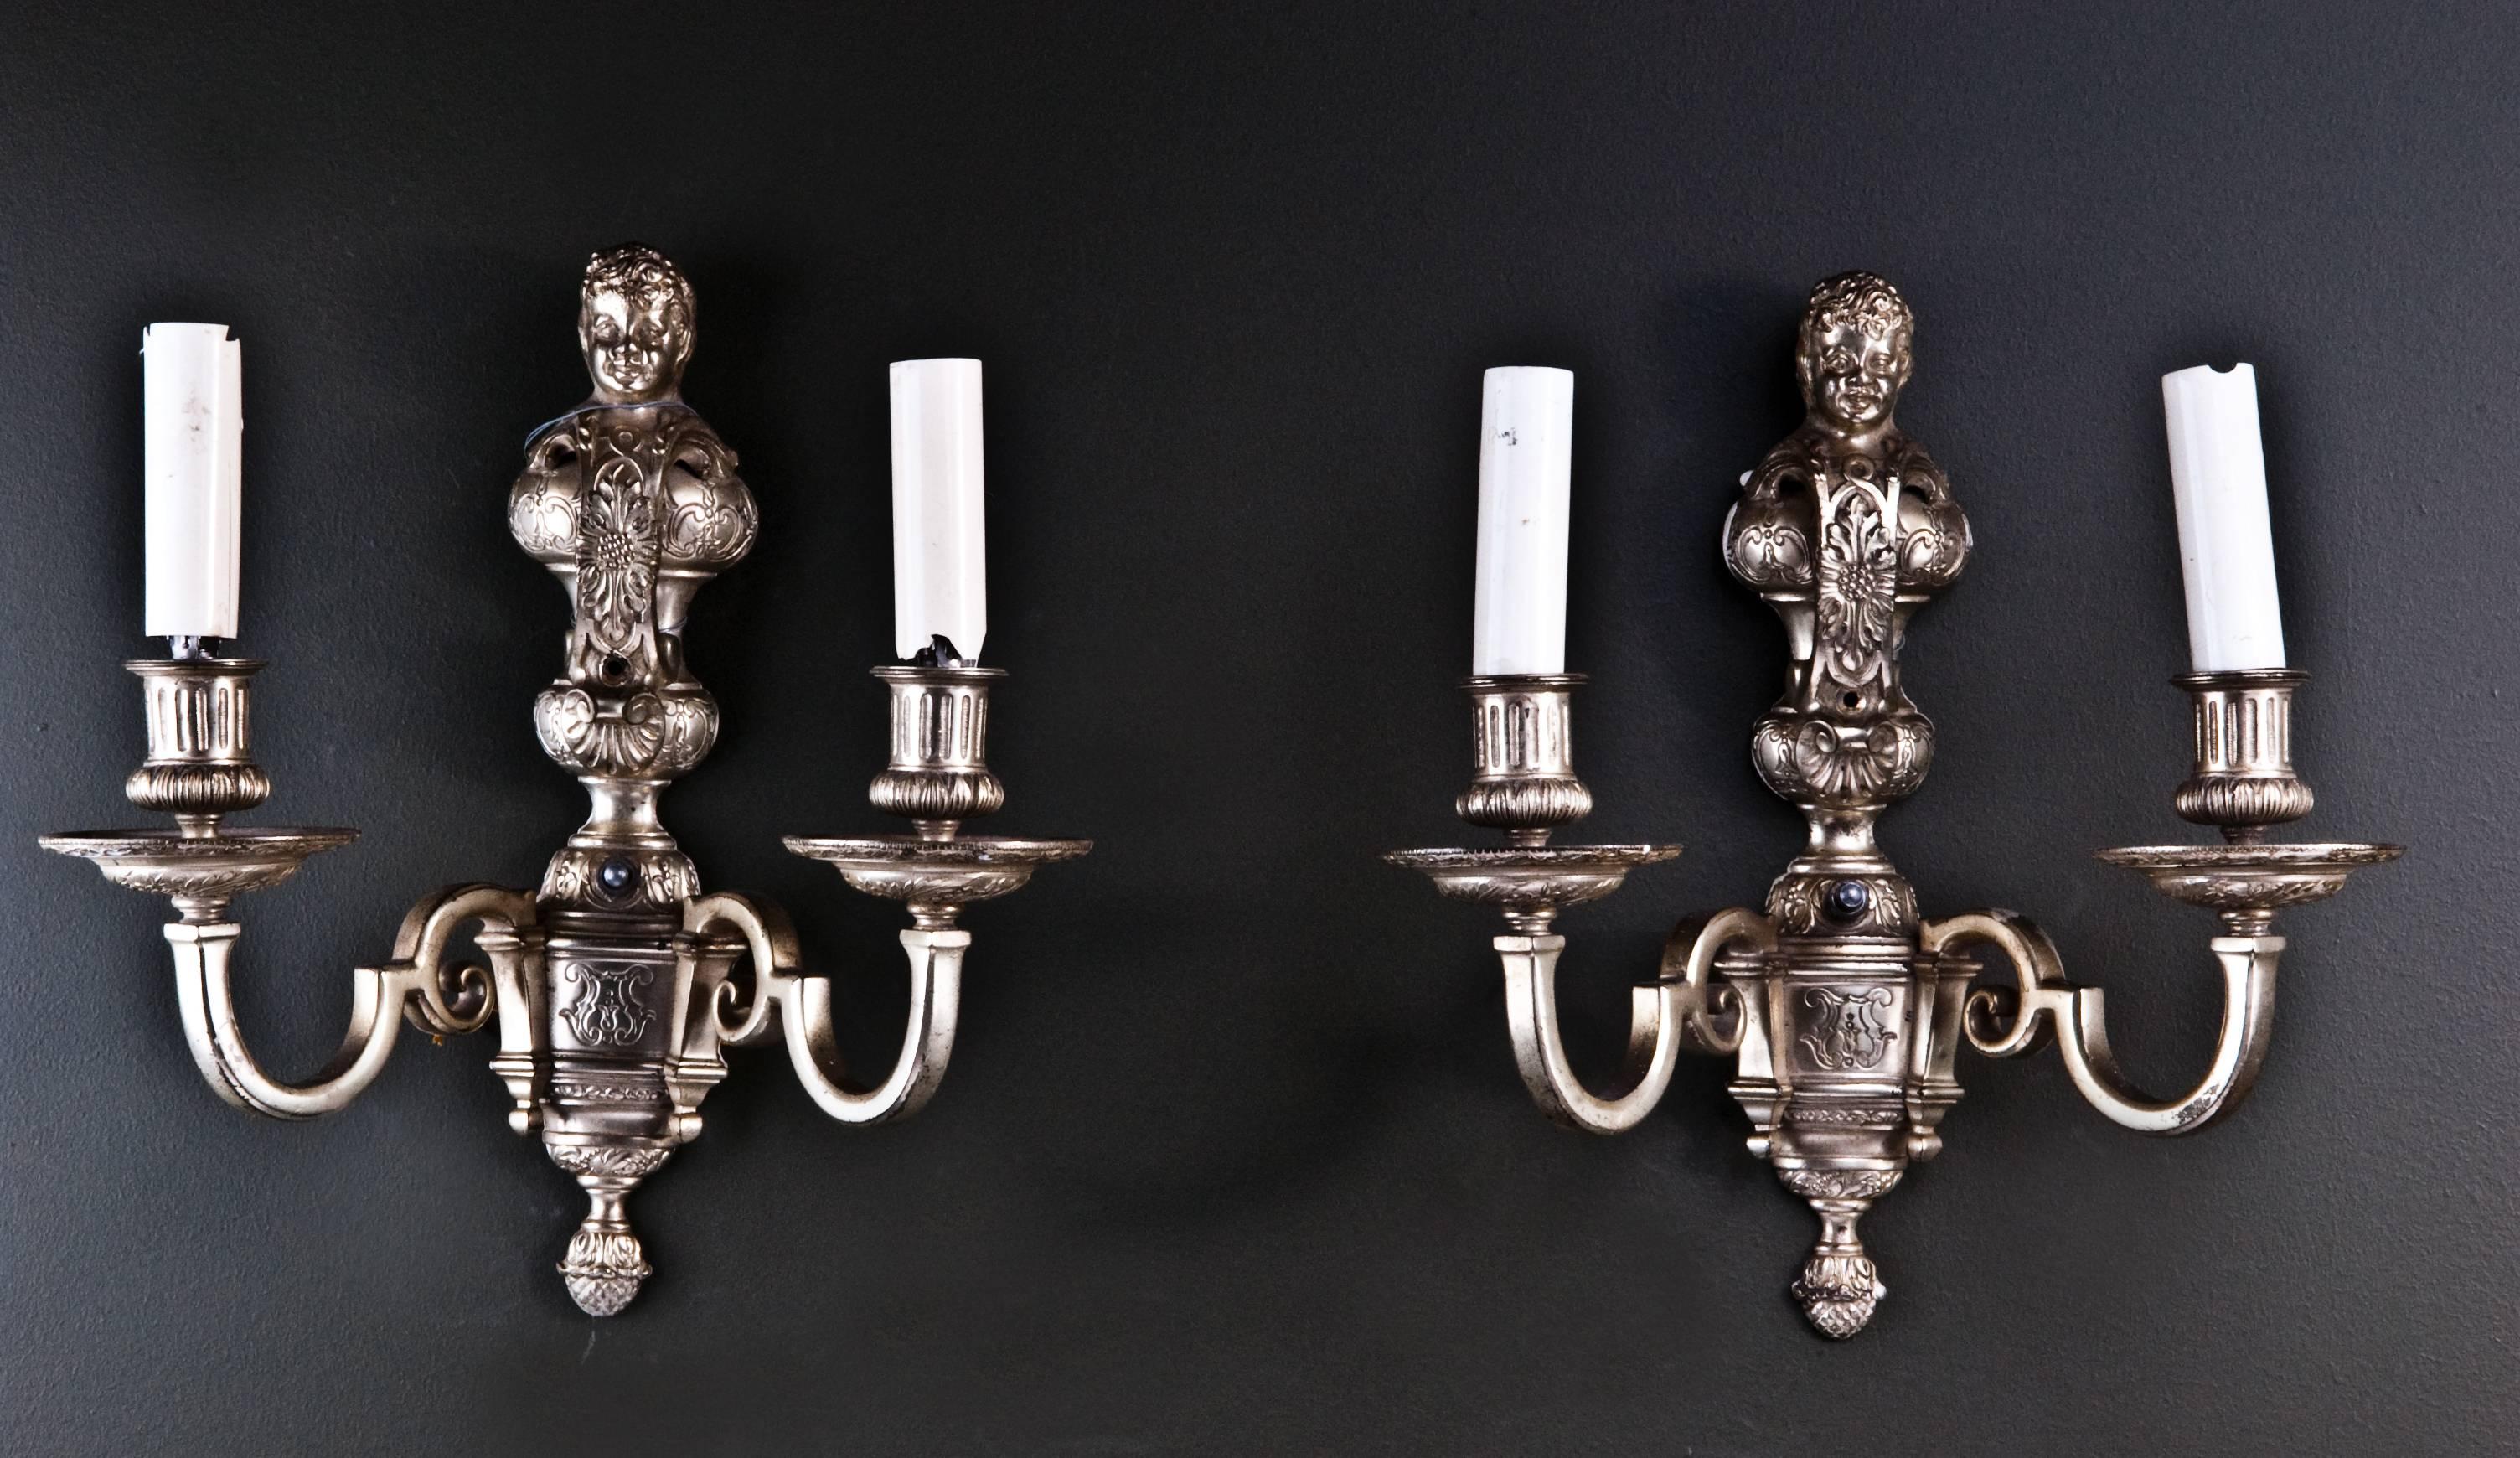 A pair of unique antique American Louis XVI style silvered bronze double light figural wall sconces attributed to E.F. Caldwell.